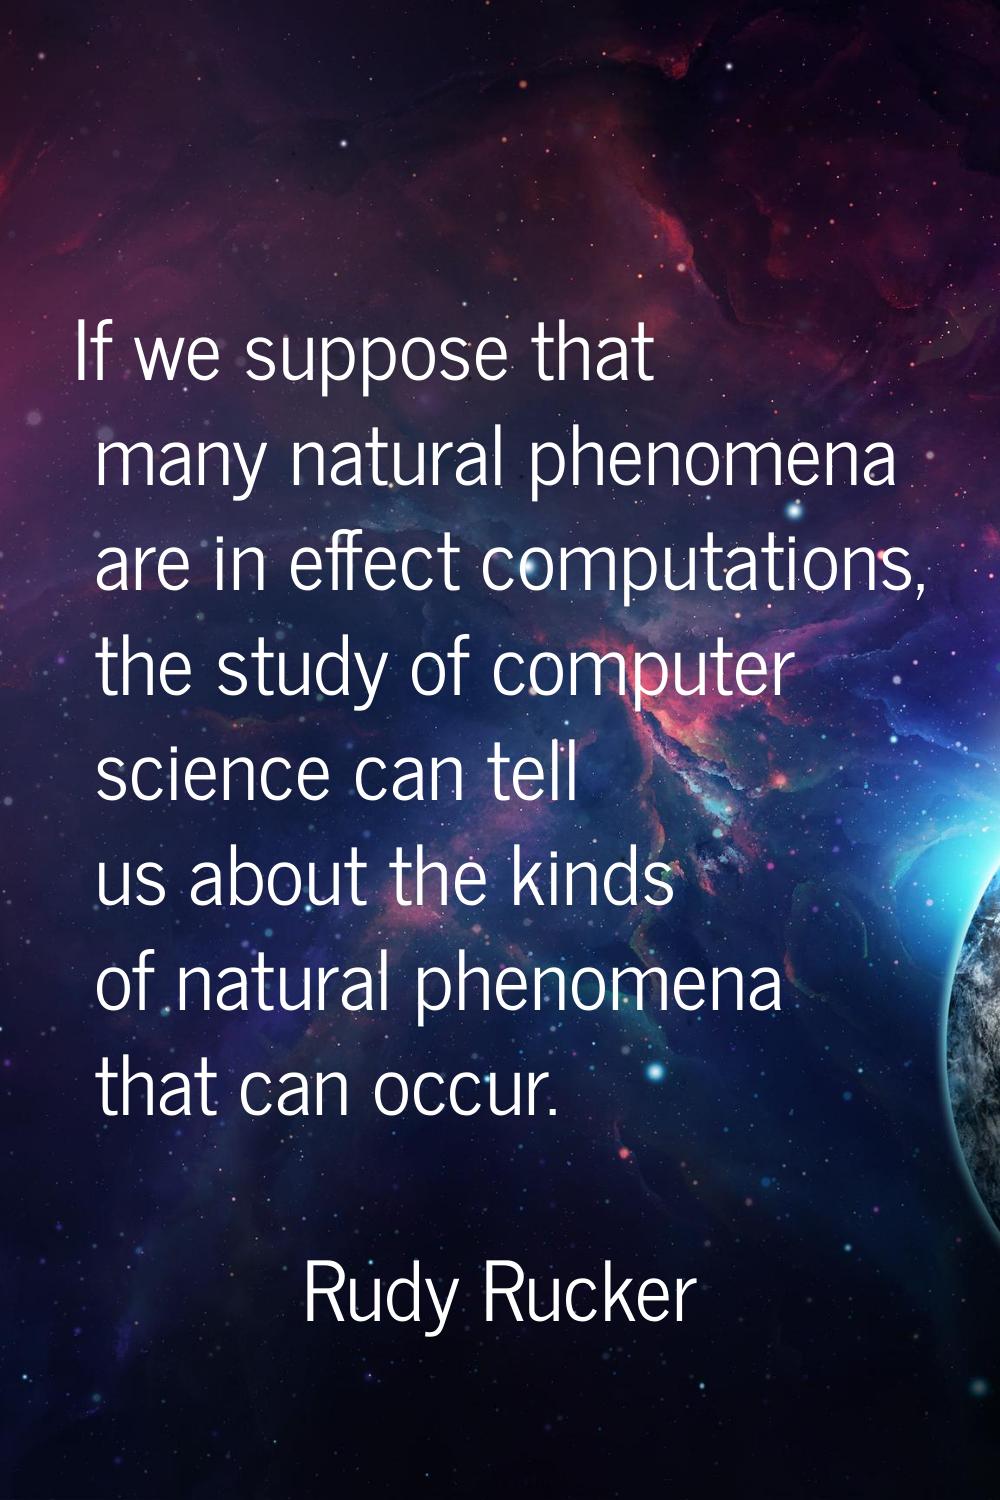 If we suppose that many natural phenomena are in effect computations, the study of computer science